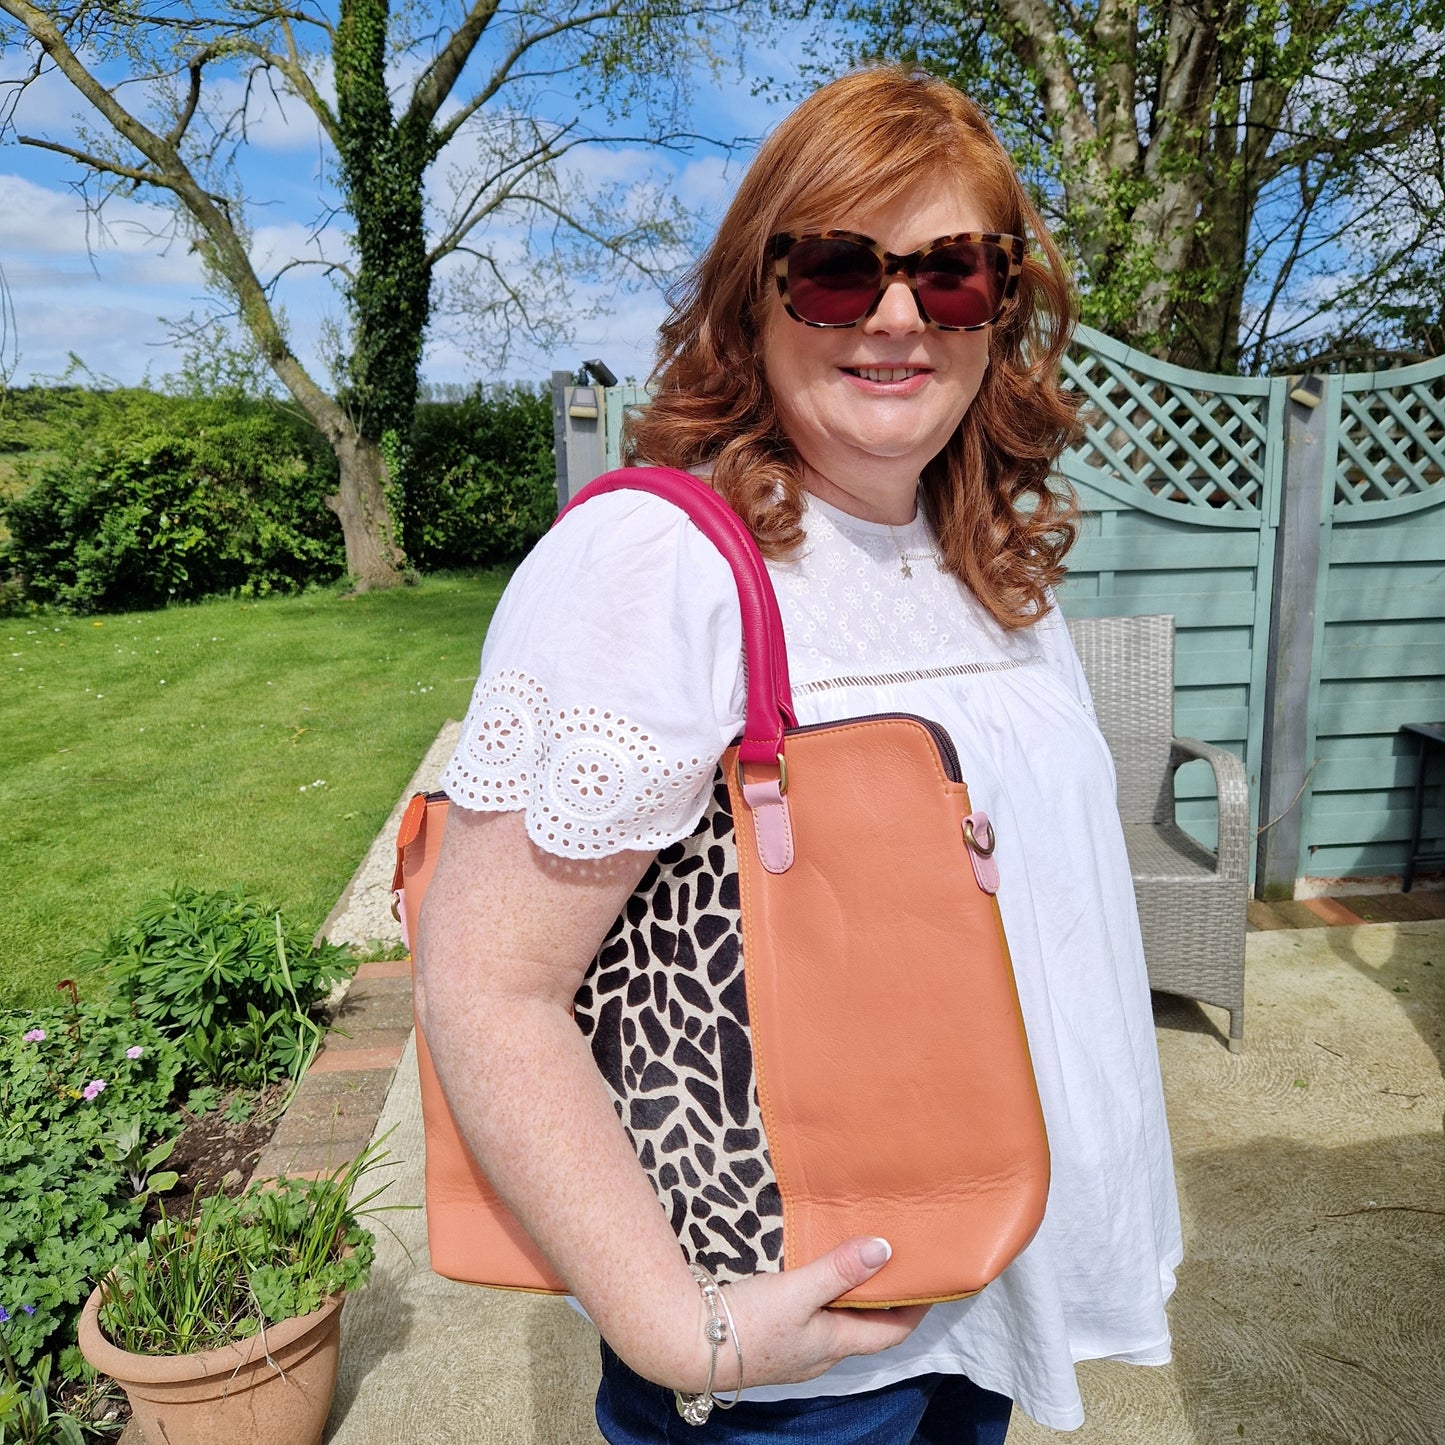 Lady holding a peach leather bag with a giraffe print panel.